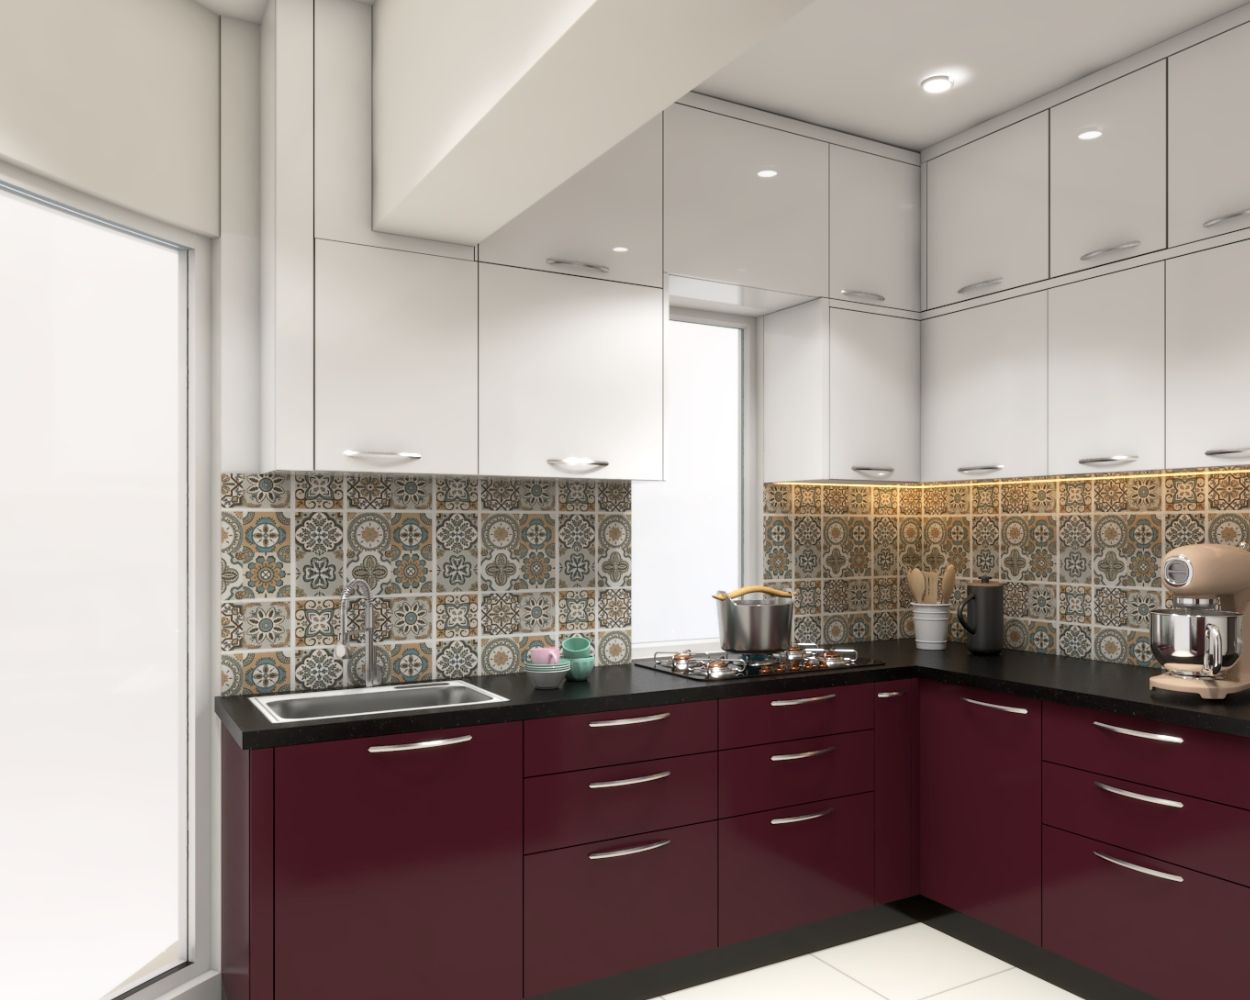 Modern L-Shaped Modular Kitchen Design with Popping Ruby and Frosty White Accents